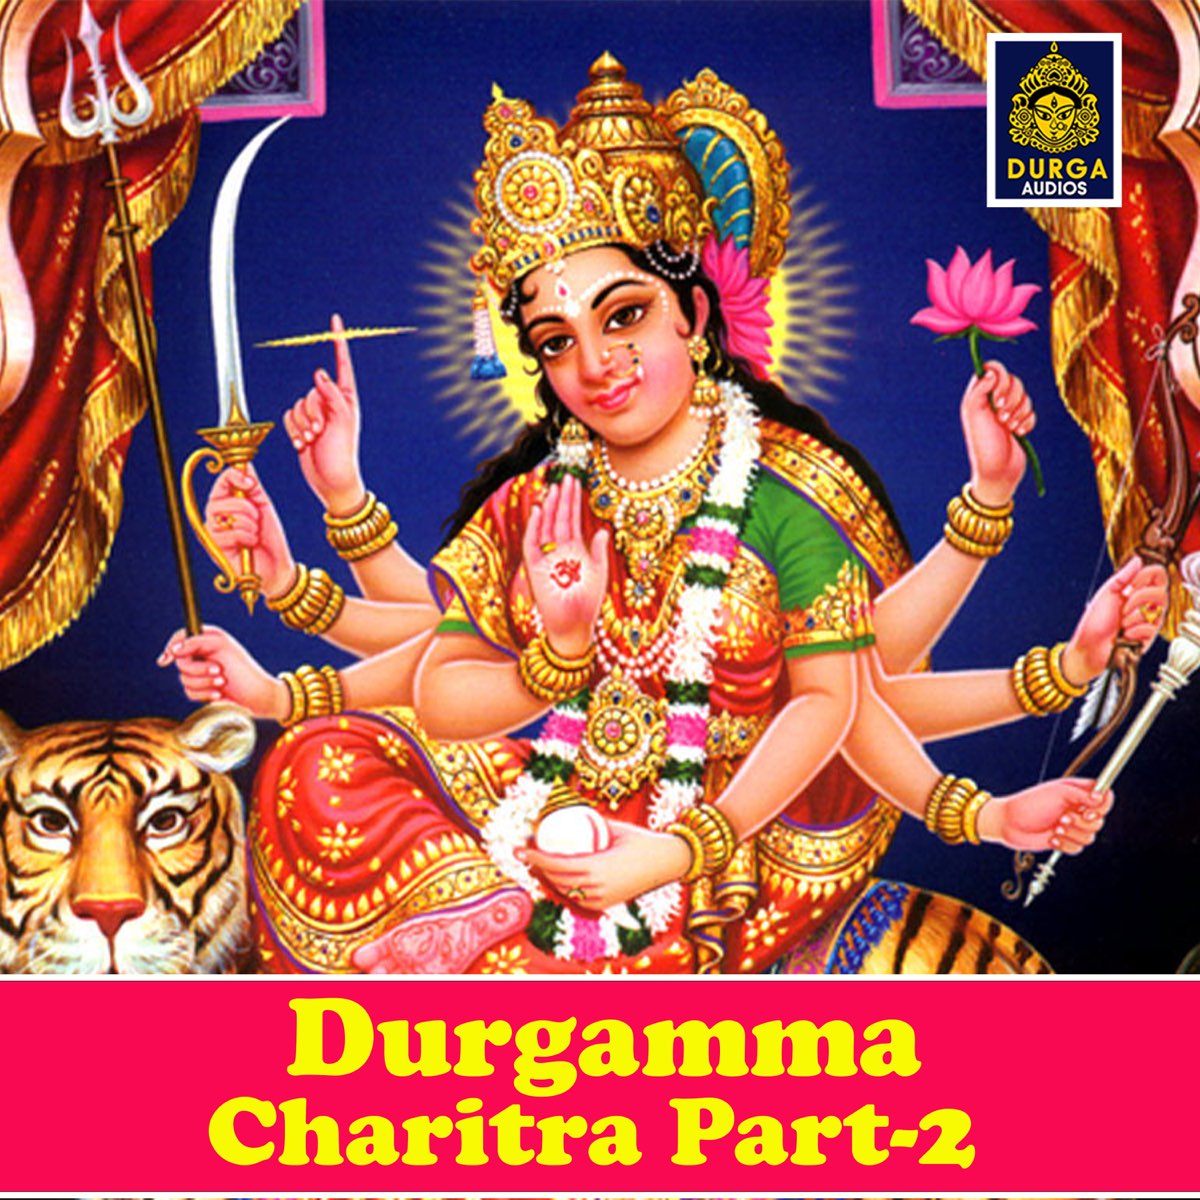 Durgamma Charitra, Pt. 2 - EP by A. Ramadevi on Apple Music